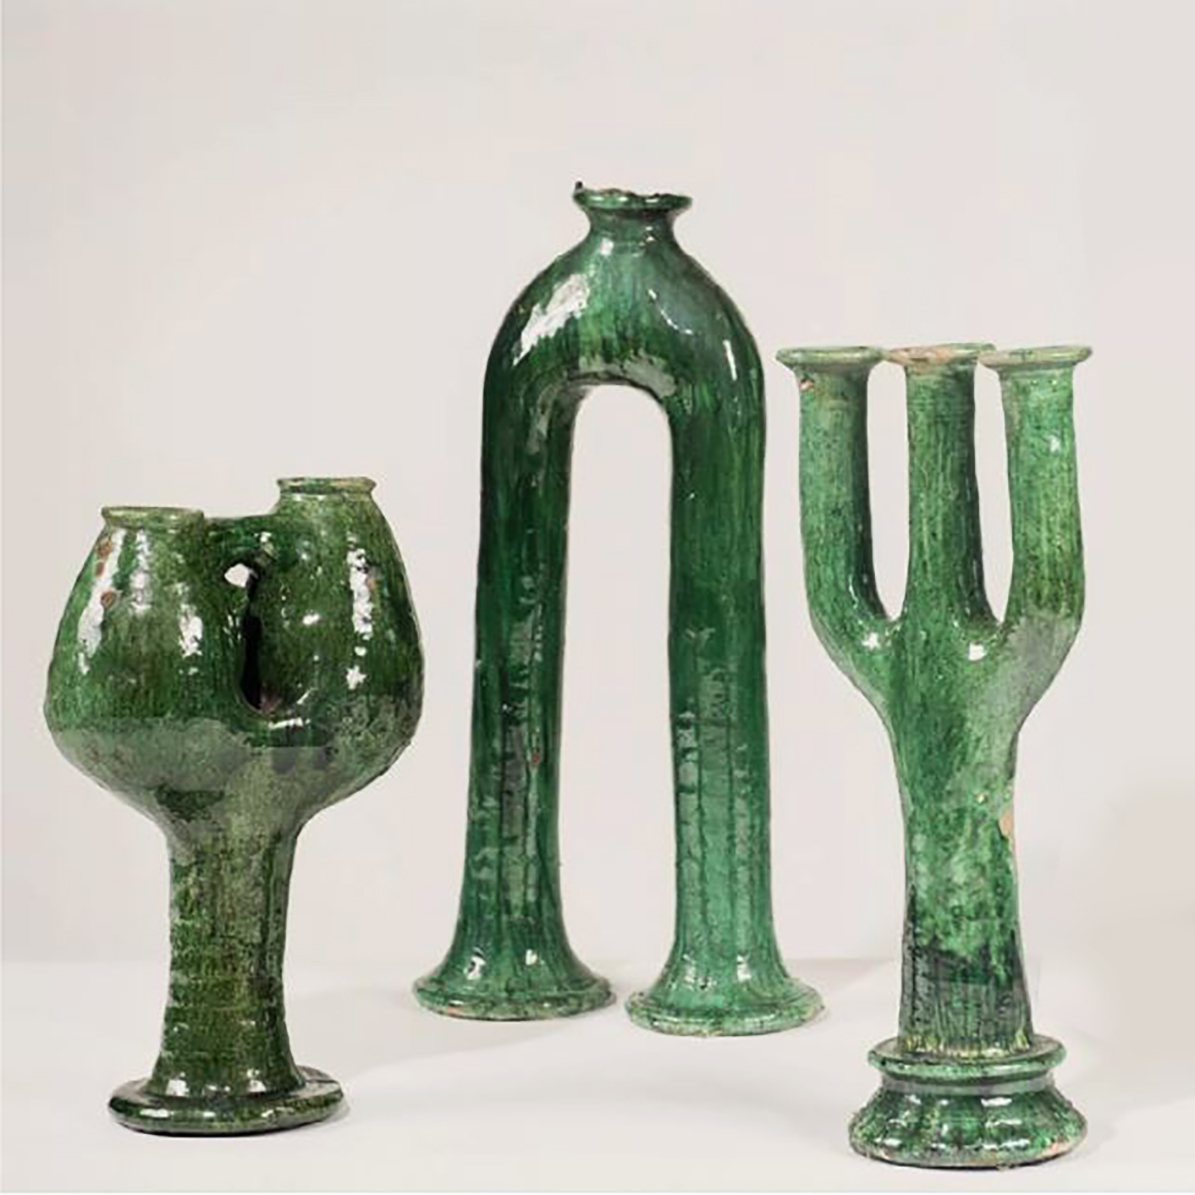 TAMEGROUTE GREEN CANDLE HOLDER 1